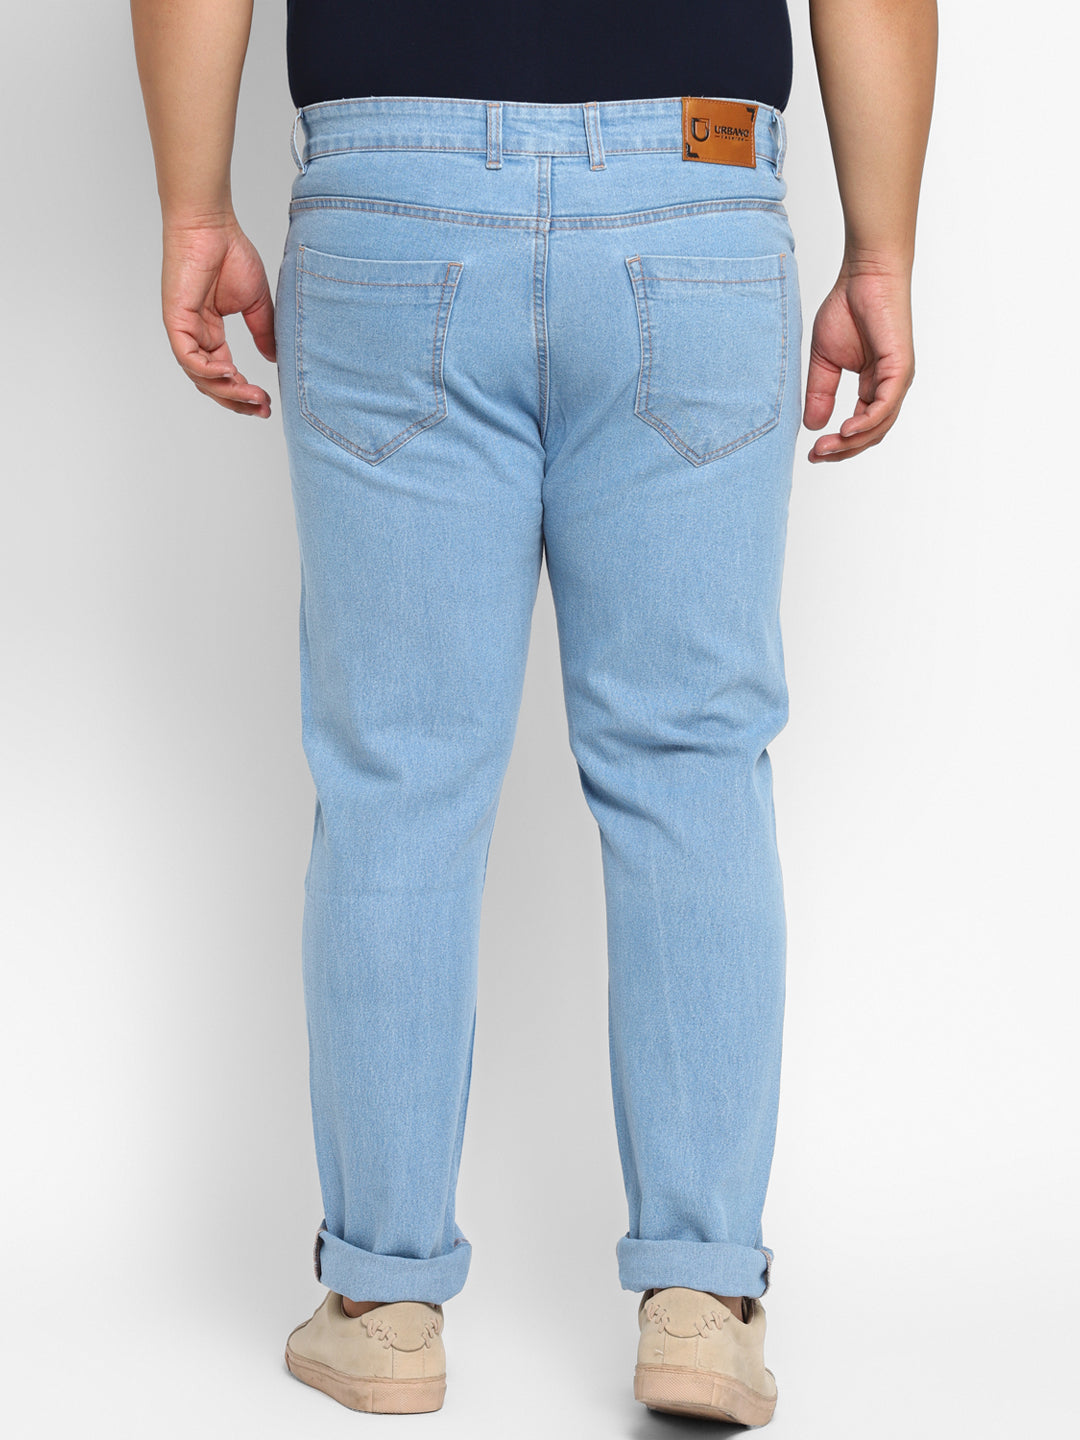 Plus Men's Ice Blue Regular Fit Washed Jeans Stretchable